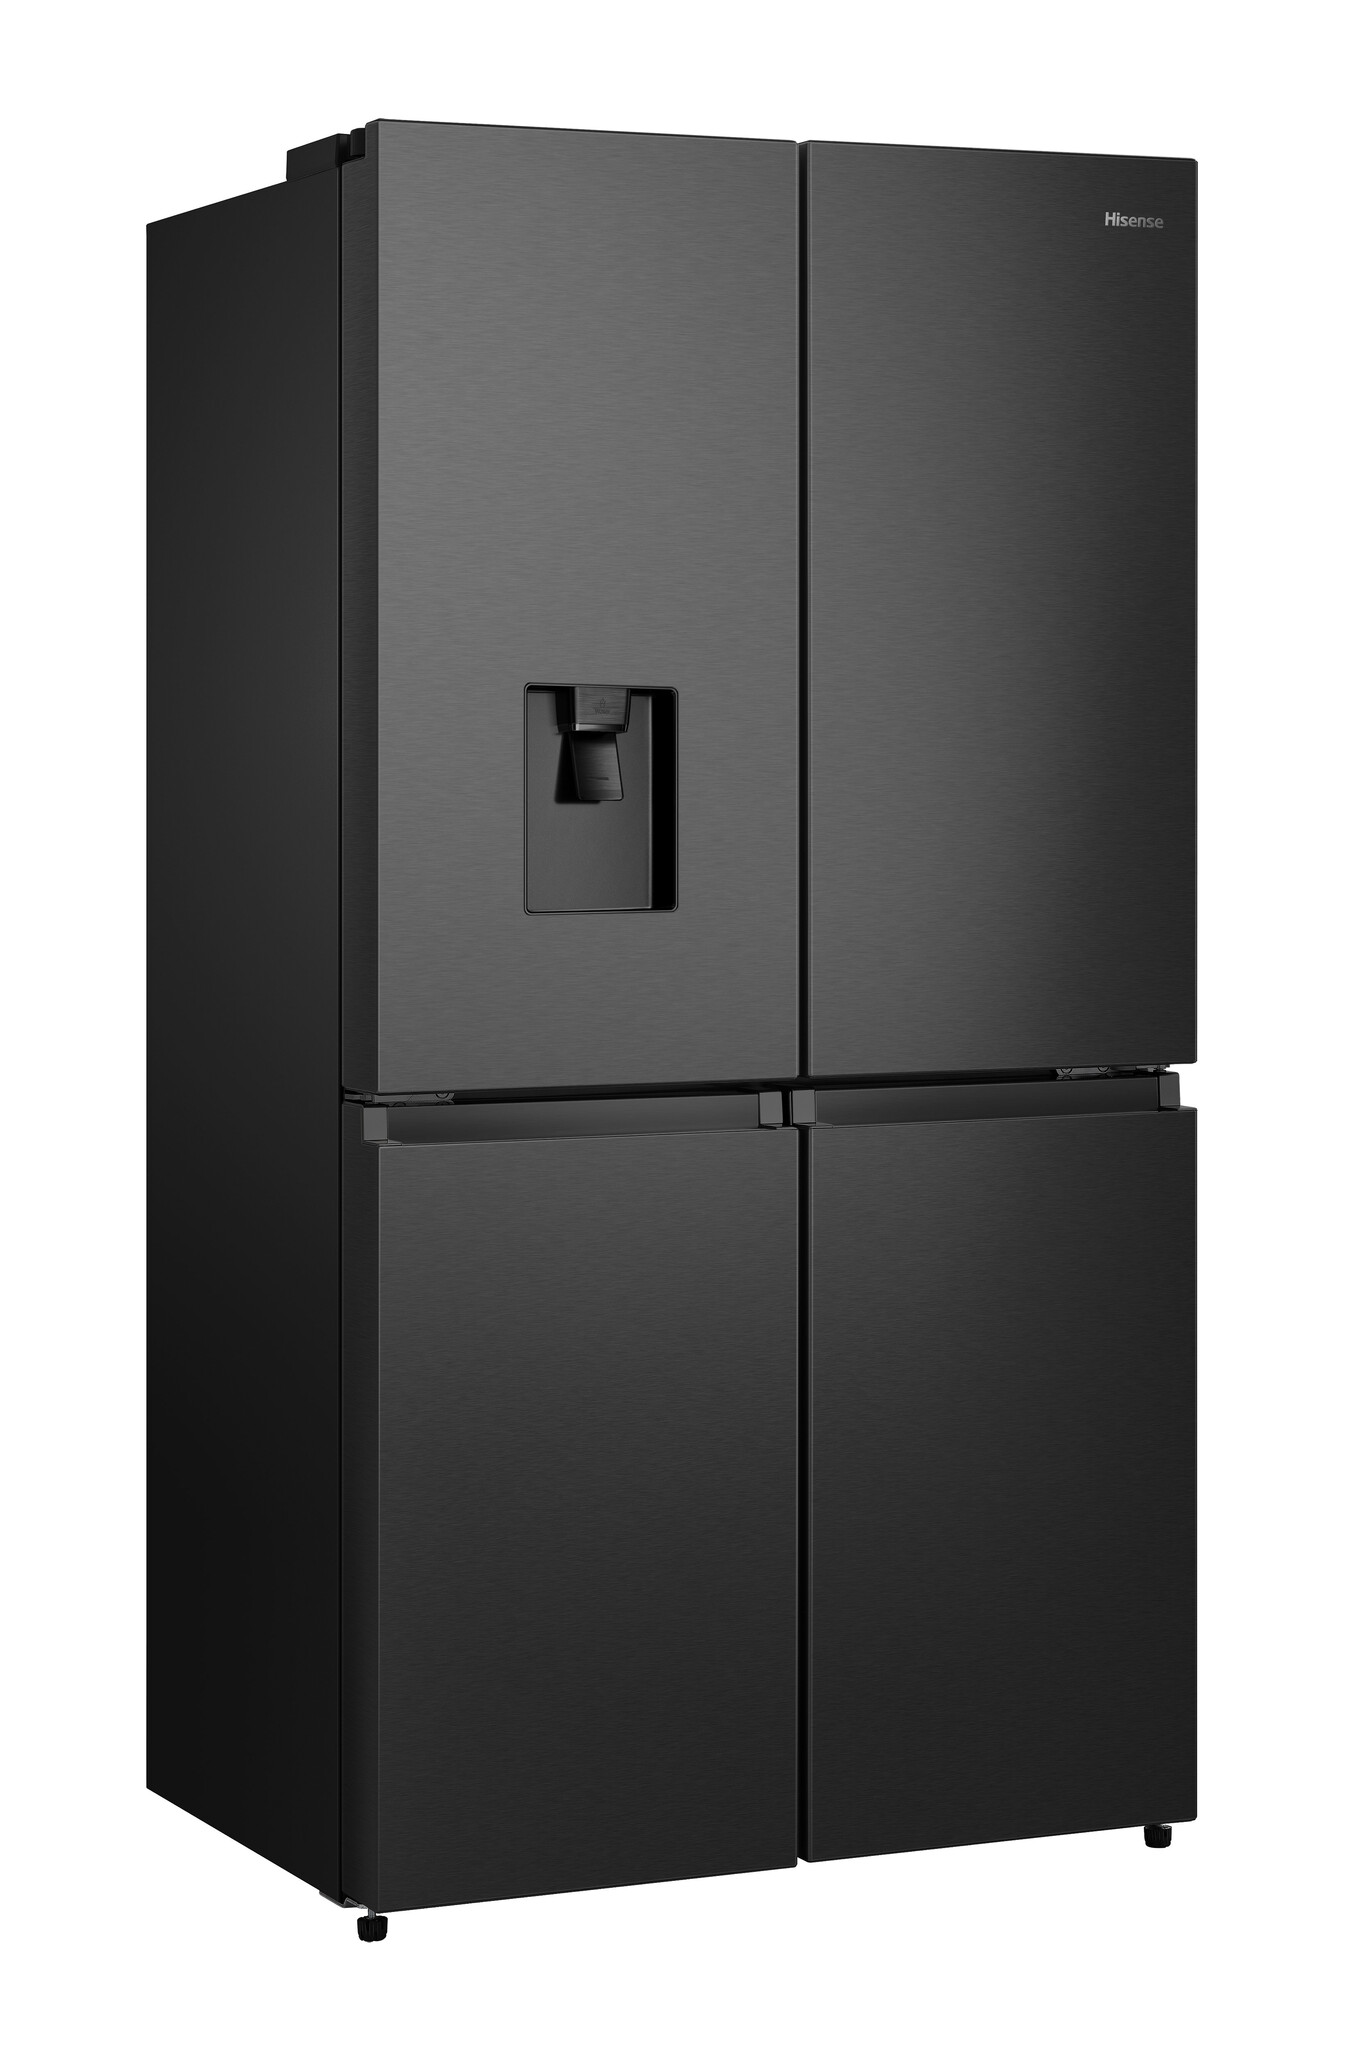 Hisense RQ758N4SWFE Wifi Connected Total No Frost American Fridge Freezer – Black – E Rated #367163